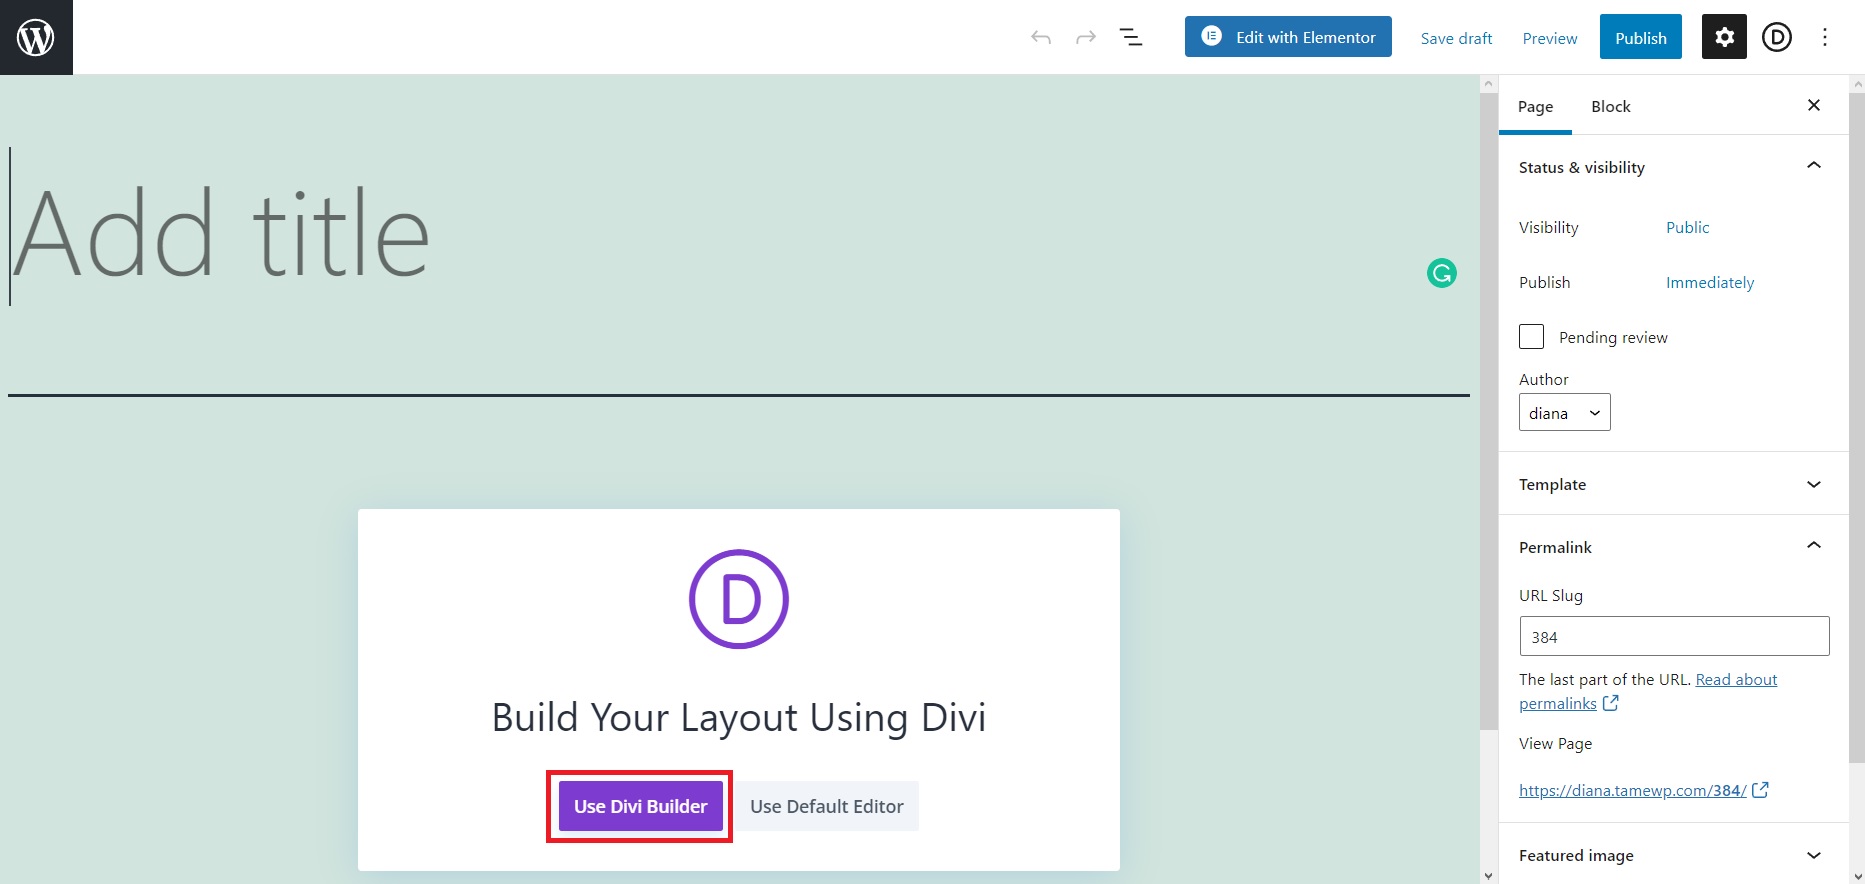 Building a new page with Divi